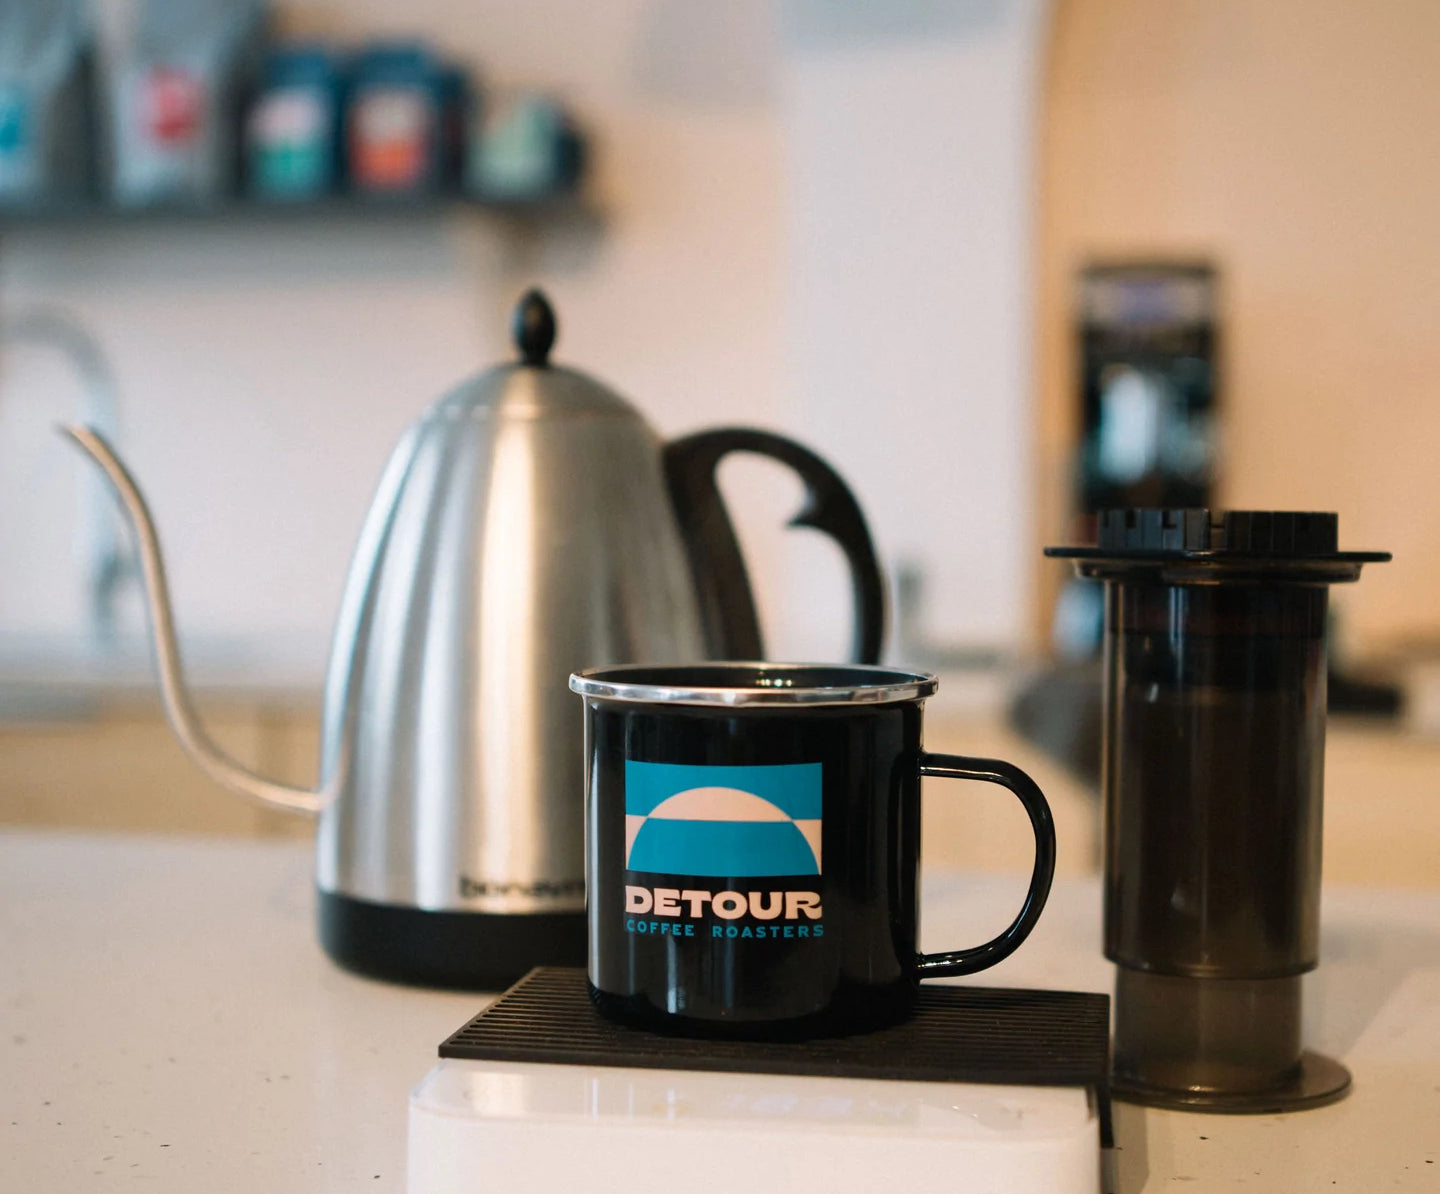 Coffee mug and kettle in a kitchen setting. Mug reads "detour"